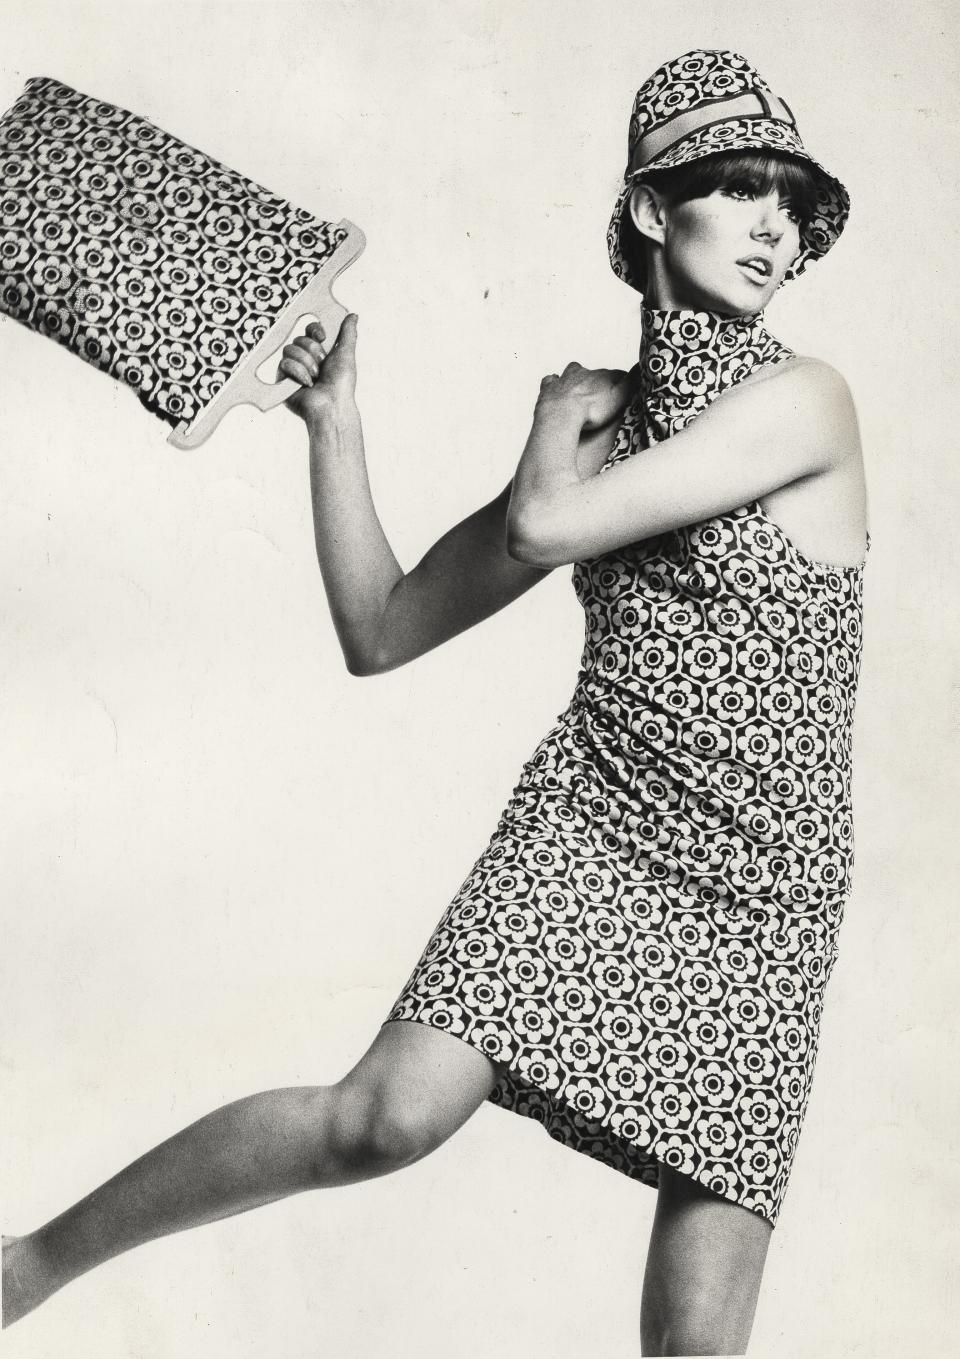 878324 Floral print shift dress and matching tote bag and hat by Biba, 1966 (b/w photo) by Atherton, Peter (fl.1966); Fashion Museum Bath; © Fashion Museum Bath.

Please note: The artwork in this photograph is in copyright. It is your responsibility to ensure this additional copyright is cleared prior to use. Please contact Bridgeman Images if you require further assistance; however, please be advised that Bridgeman does not currently hold contact information for the copyright handler of this artwork.